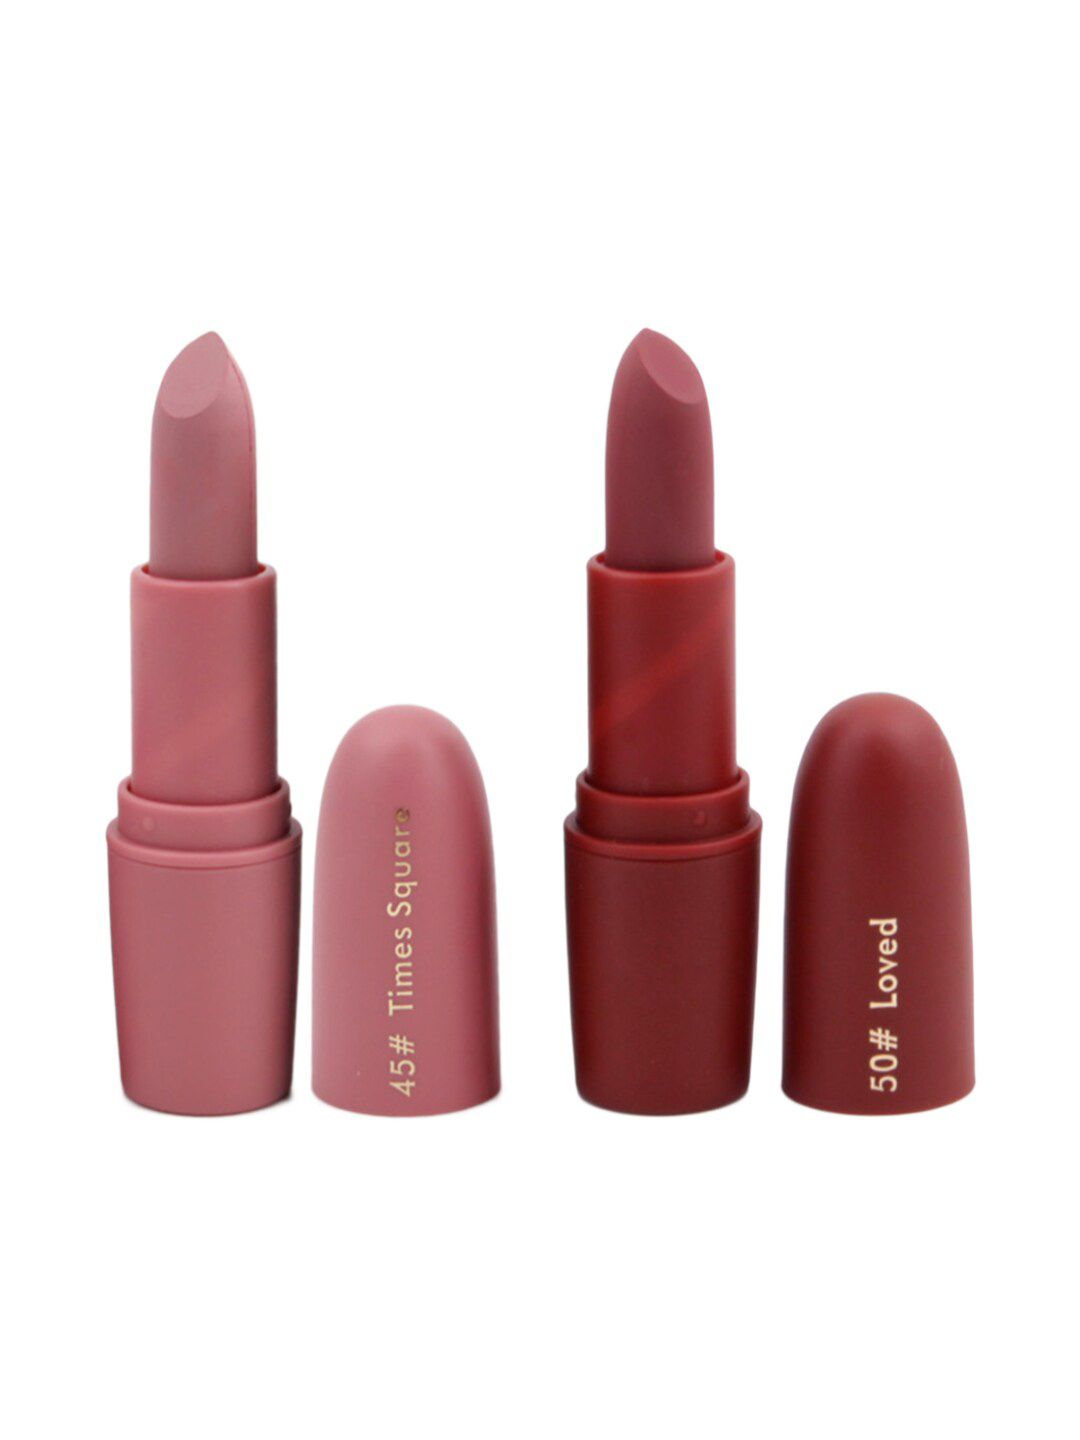 MISS ROSE Set of 2 Matte Creamy Lipsticks - Times Square 45 & Loved 50 Price in India